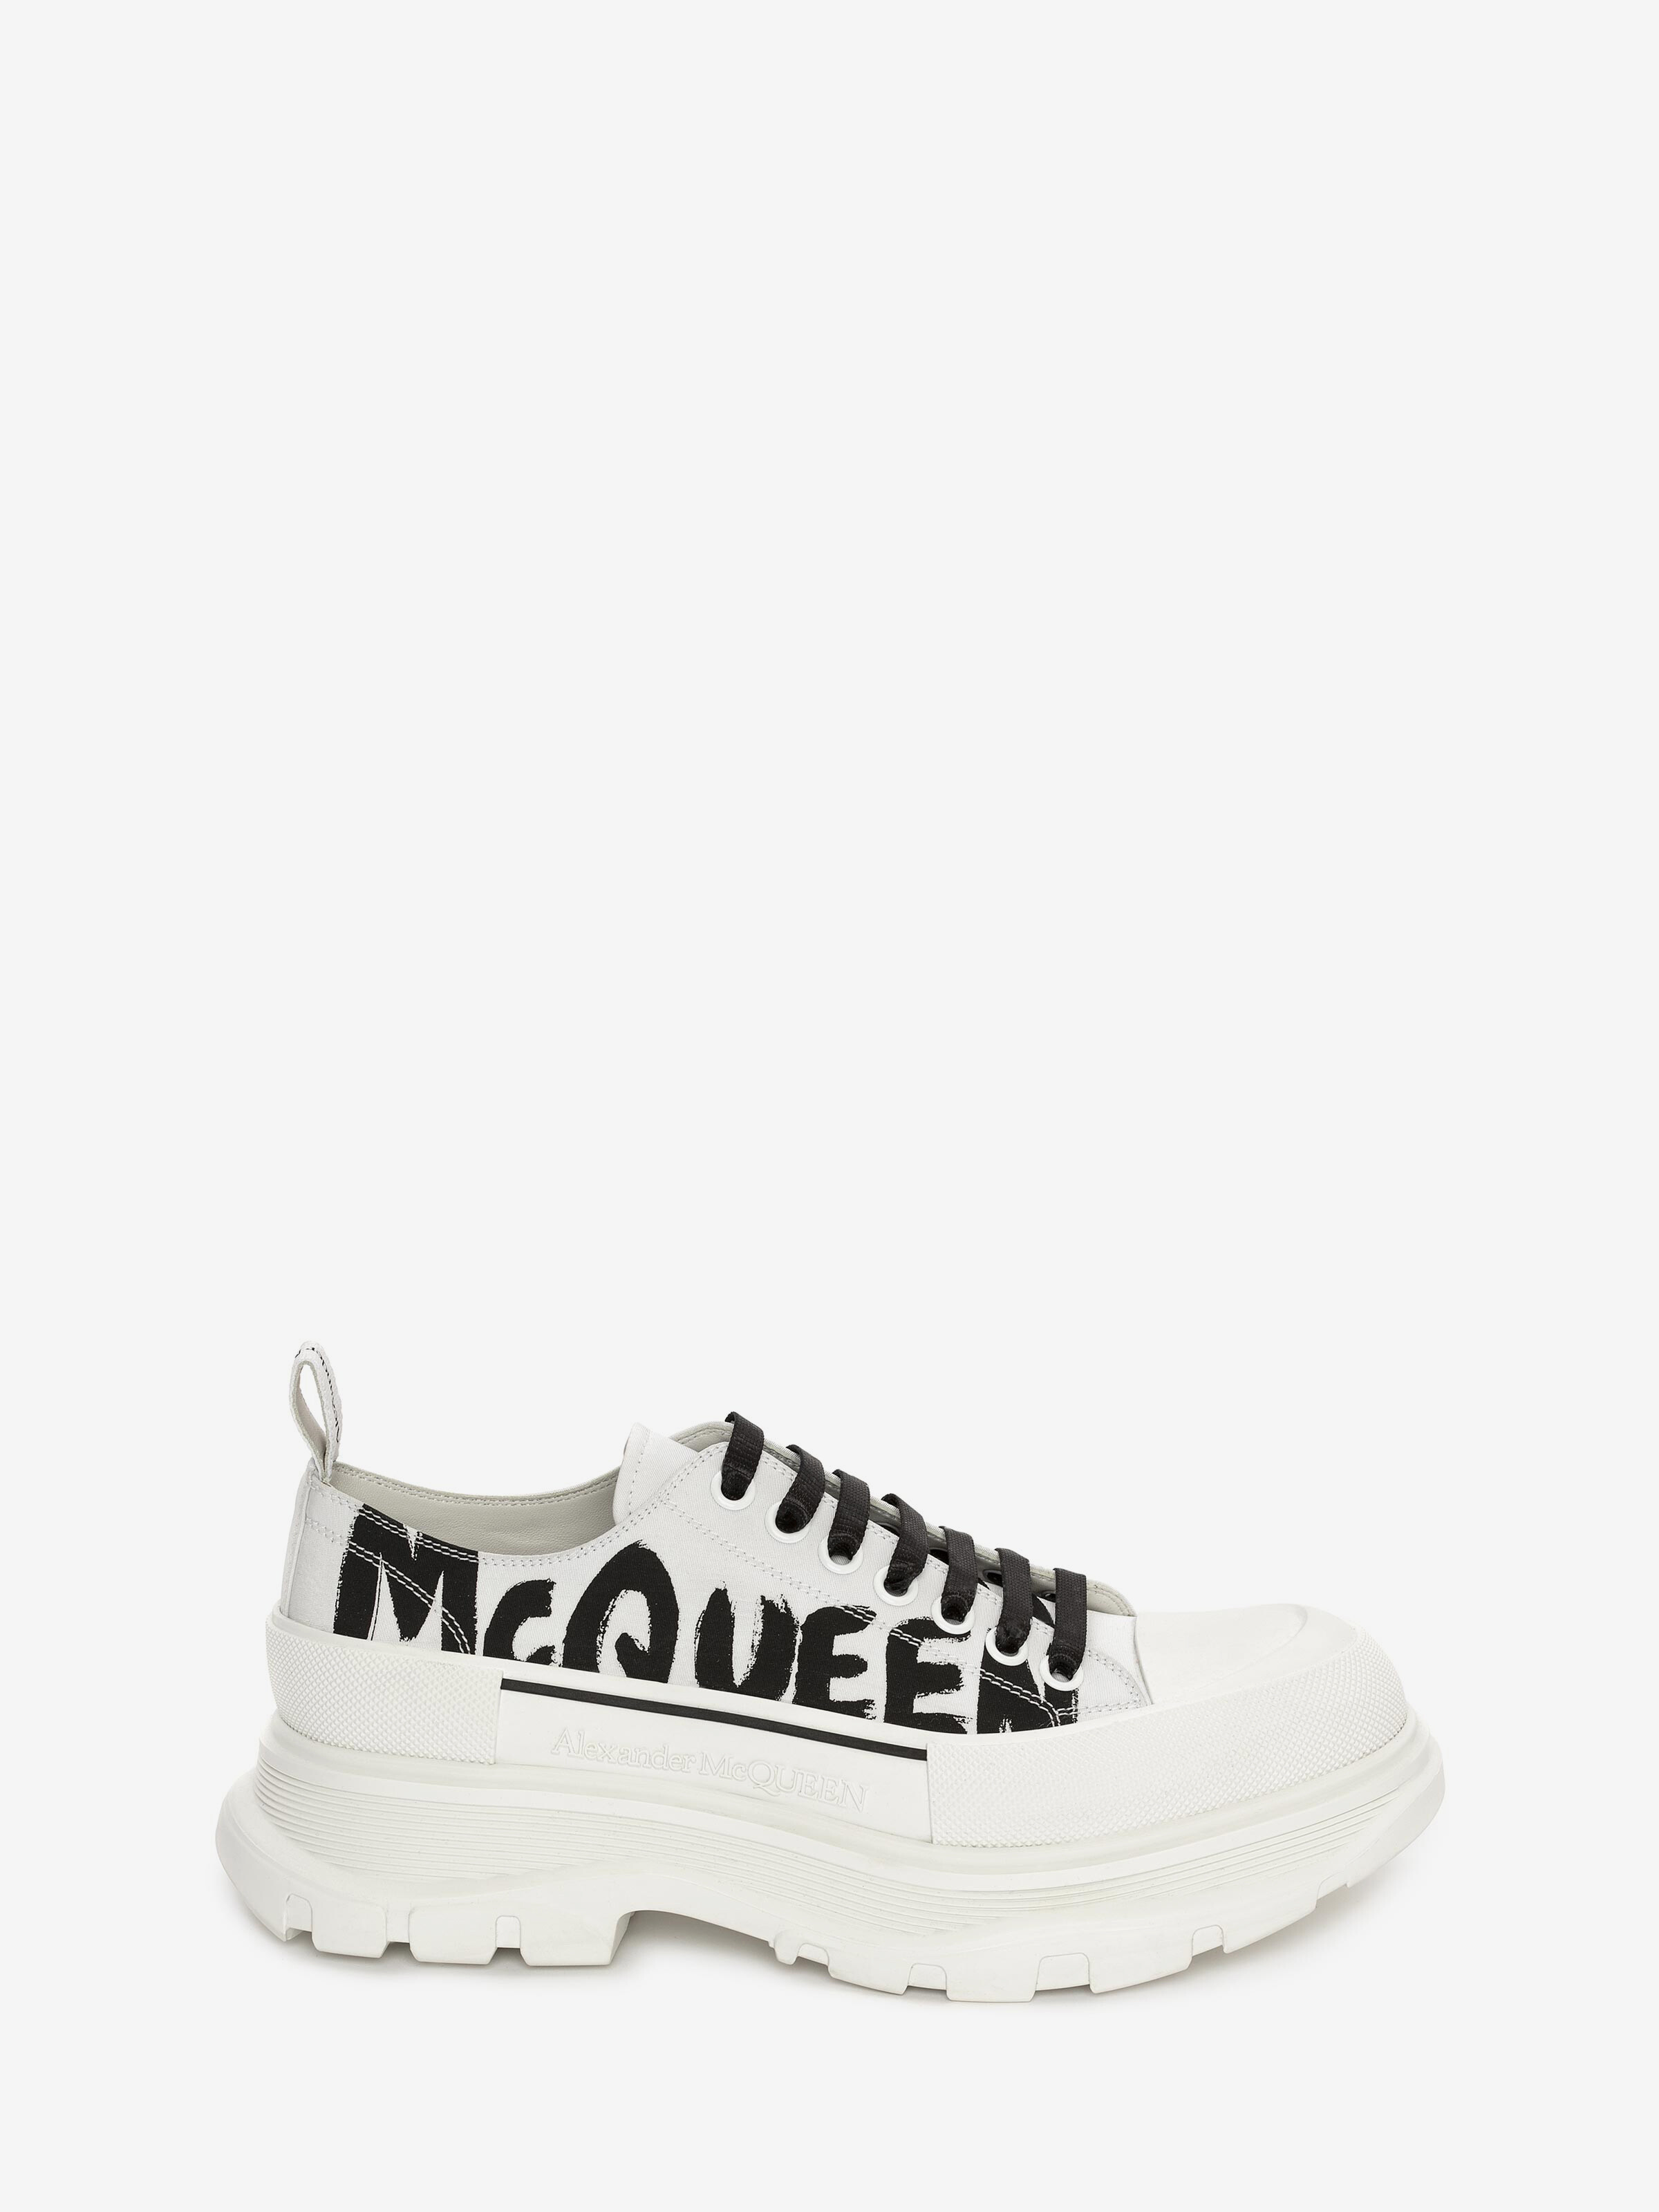 Alexander Mcqueen Tread Slick Lace Up In Optic White | ModeSens